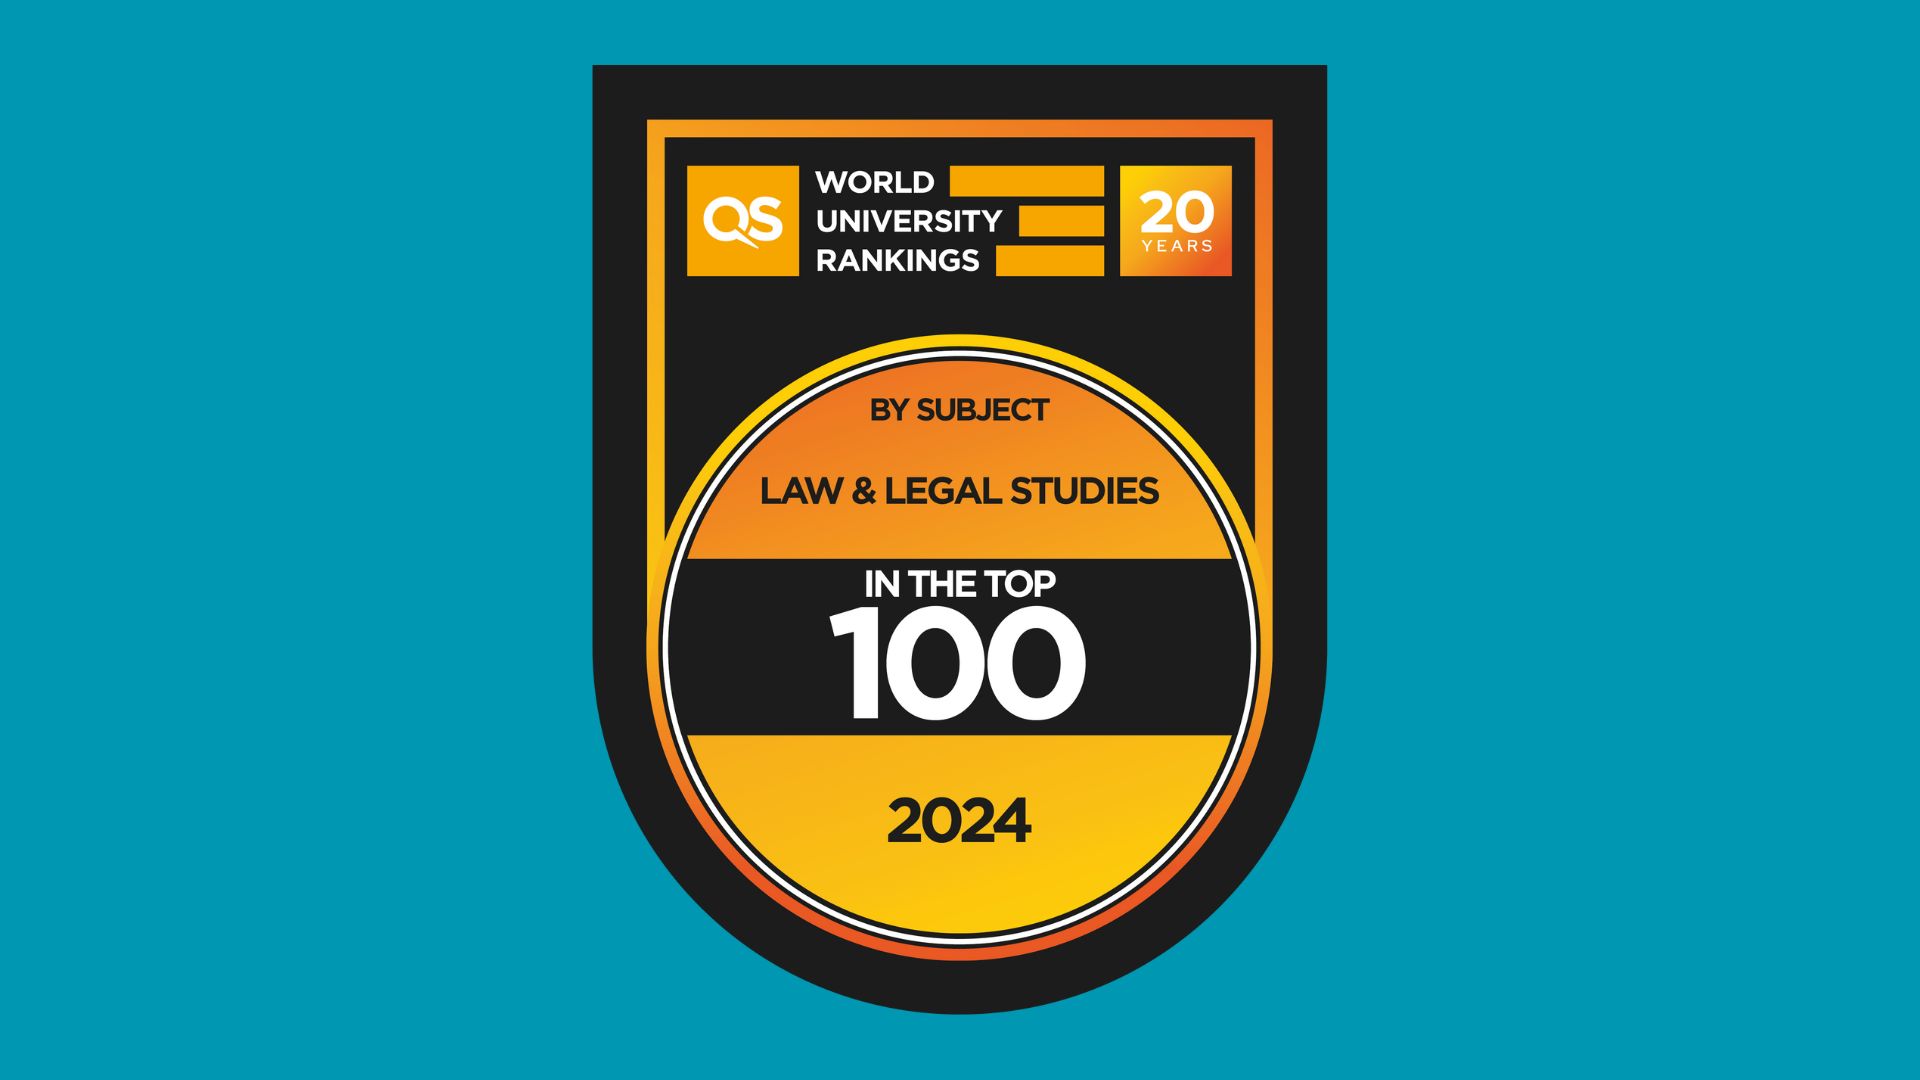 UCC School of Law ranked among the Top 100 Law Schools in the world, placed 73rd in the world. 